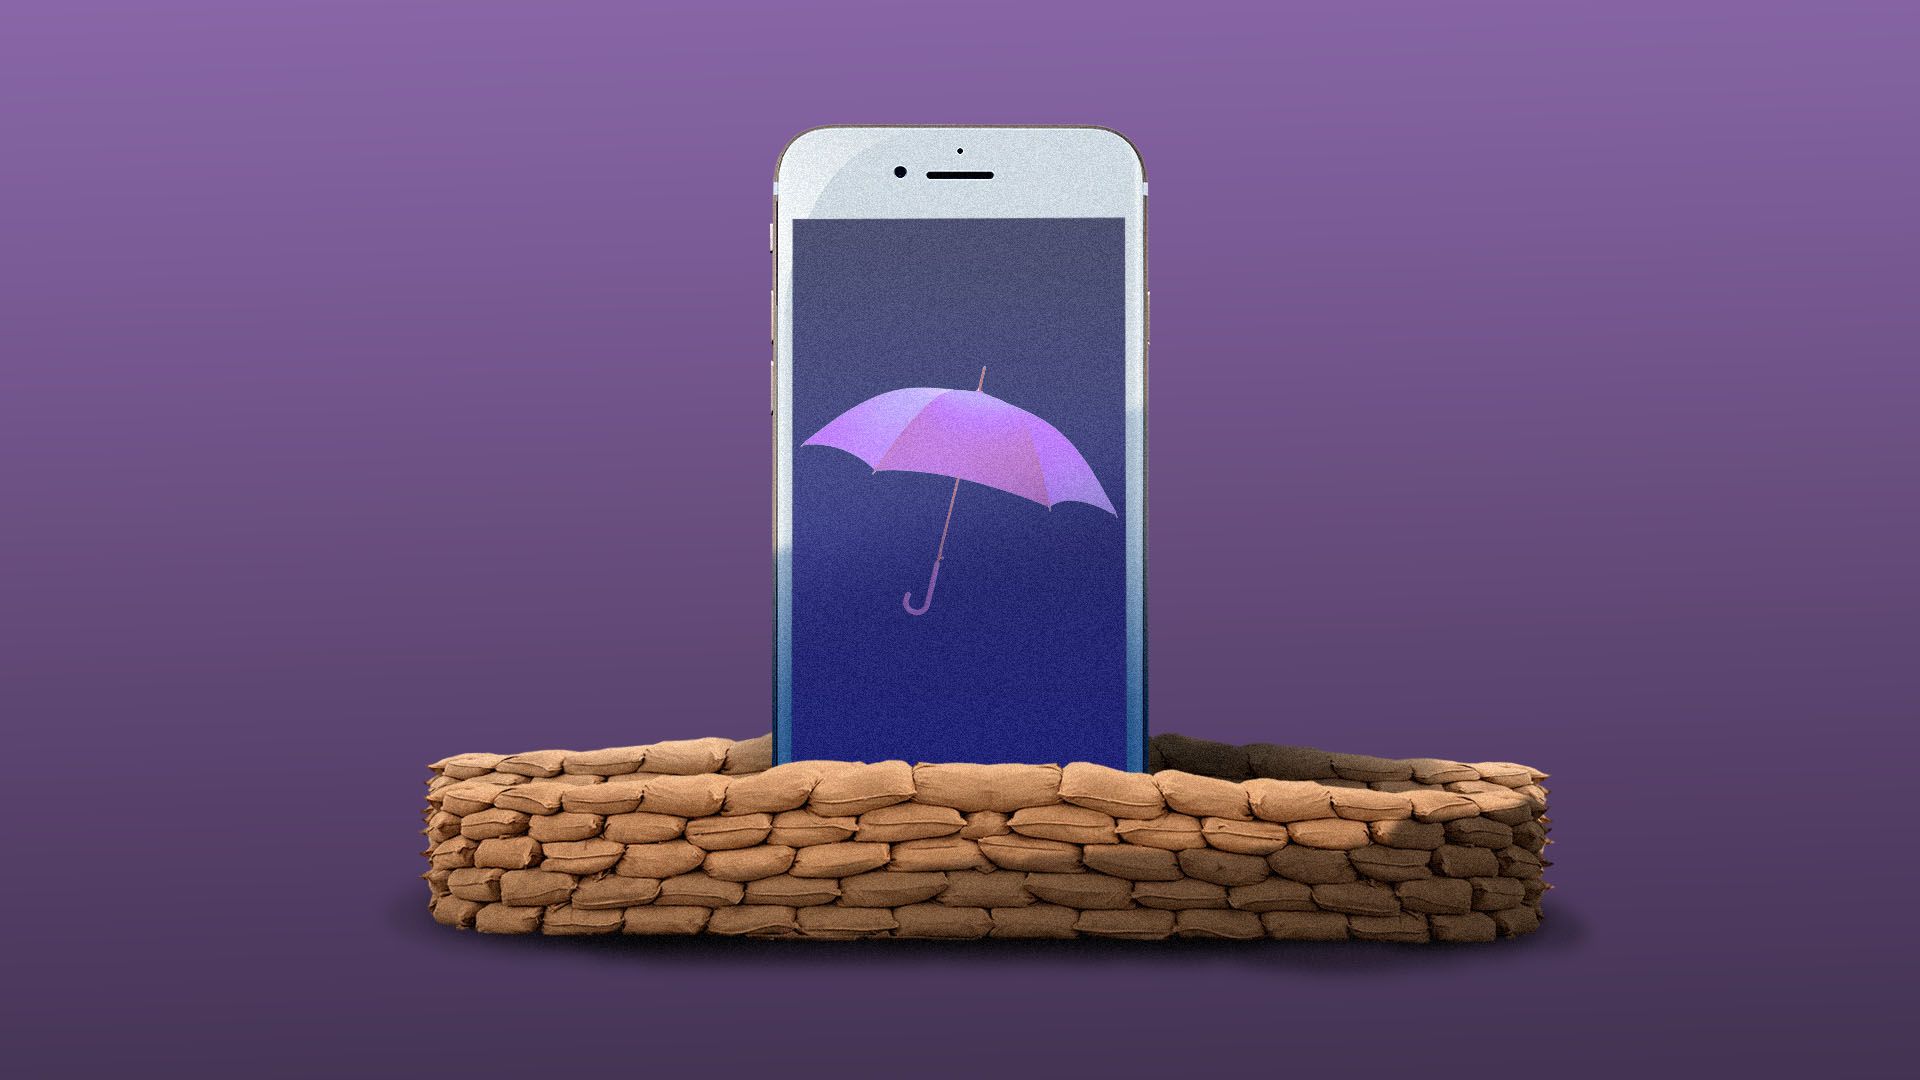 Illustration of a cell phone with an umbrella on the screen, surrounded by sandbags.